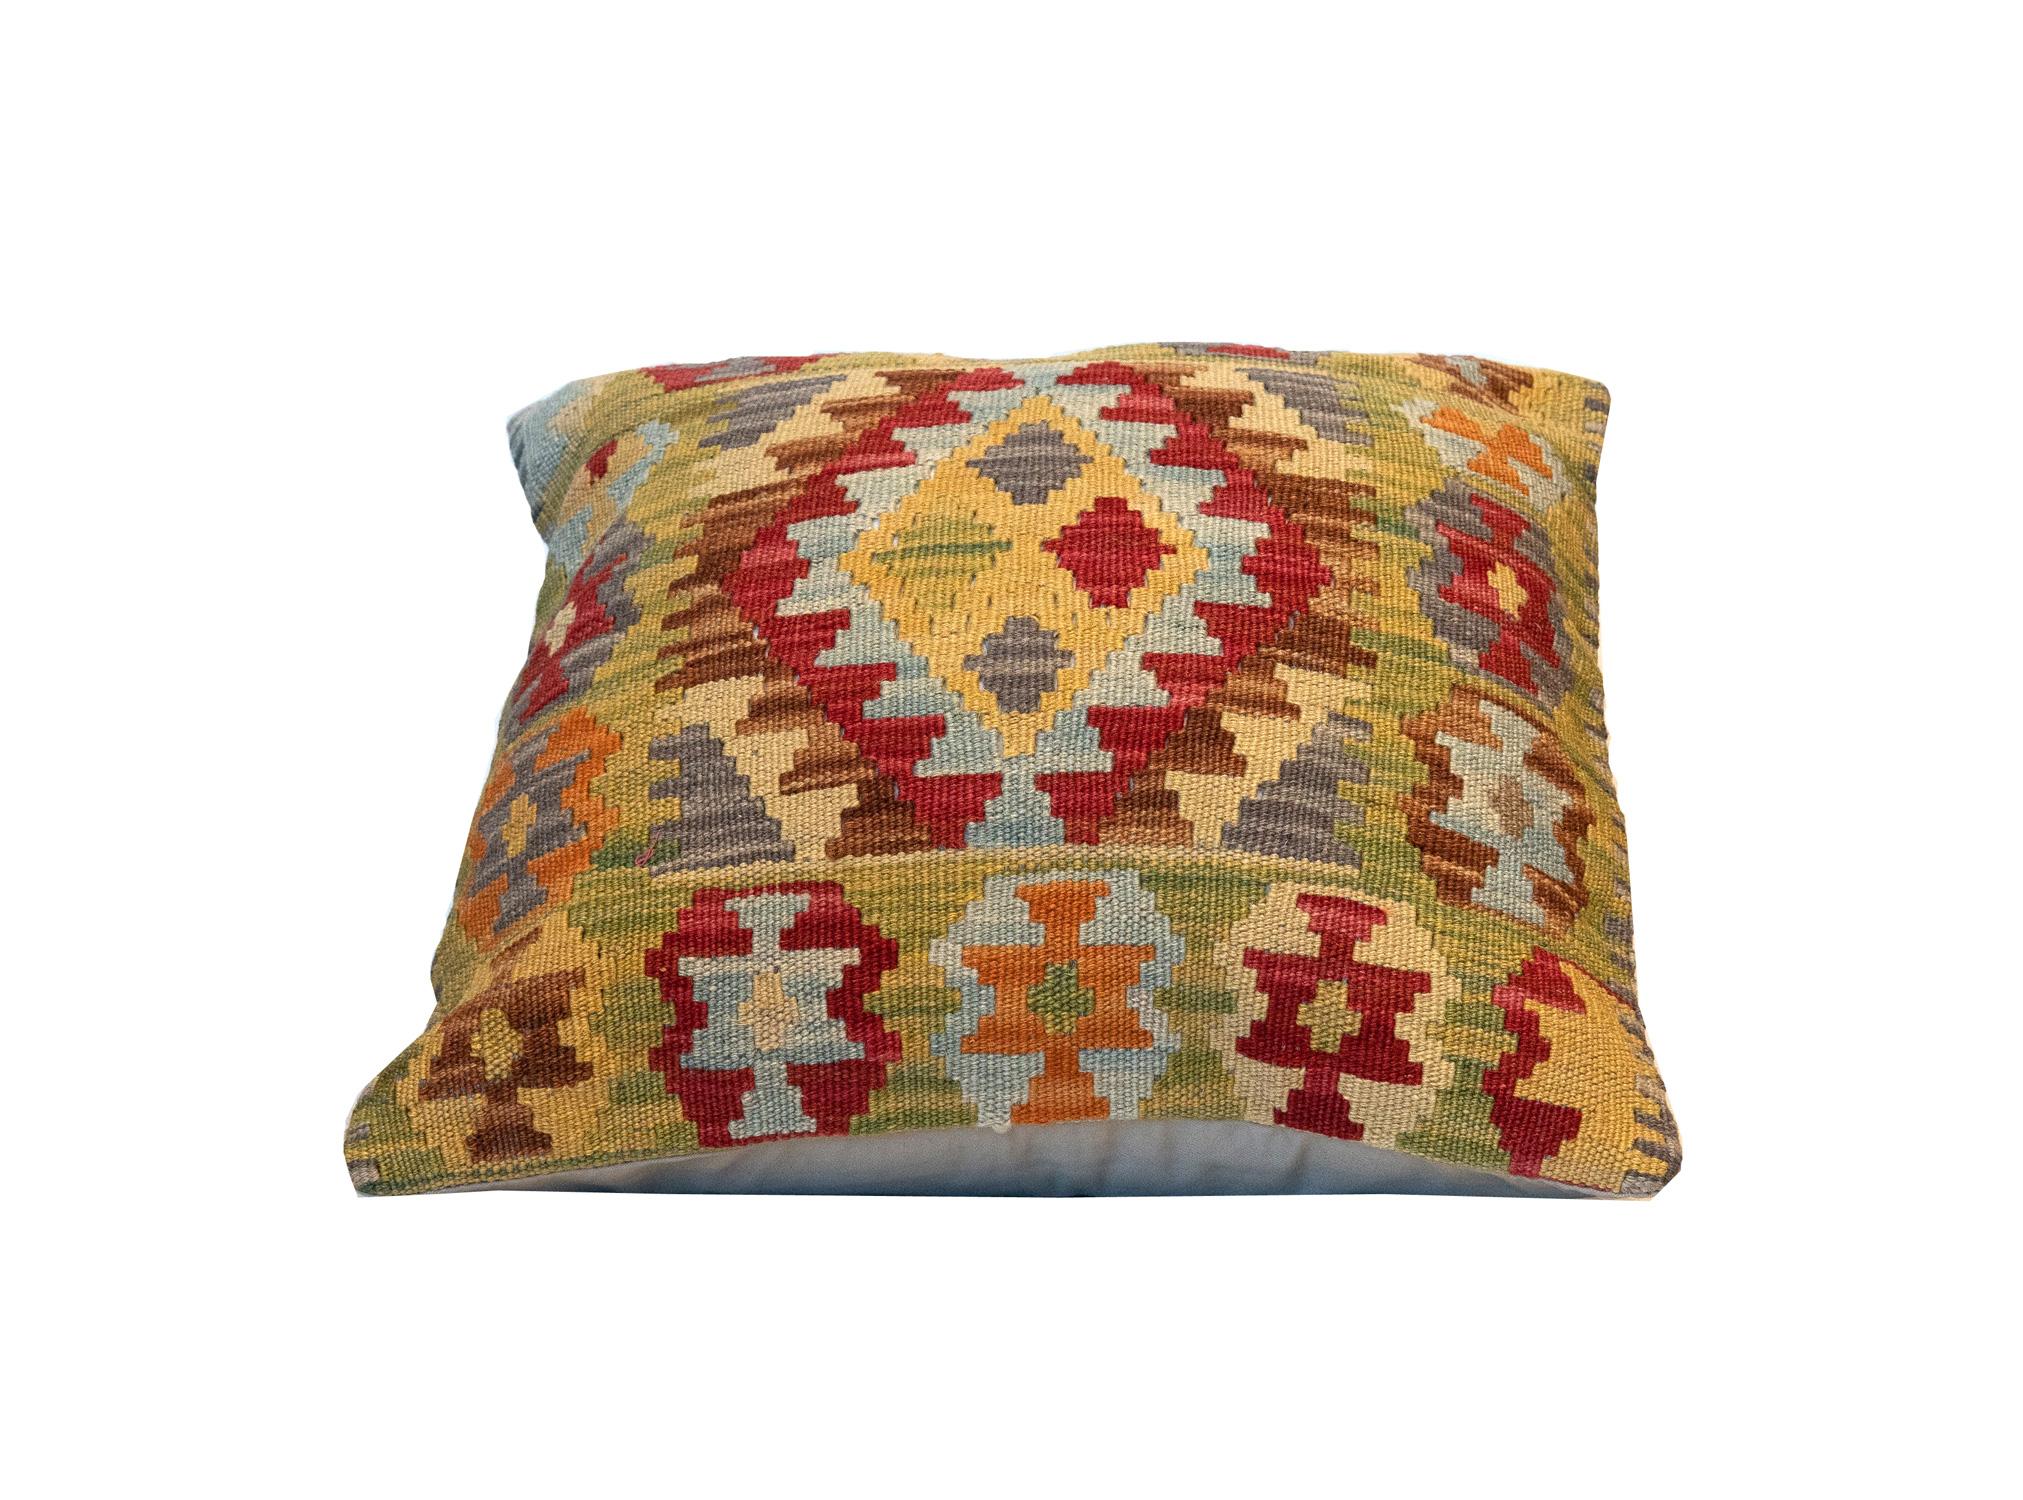 Afghan Kilim Geometric Cushion Cover Handwoven Bold Green Red Scatter Cushion